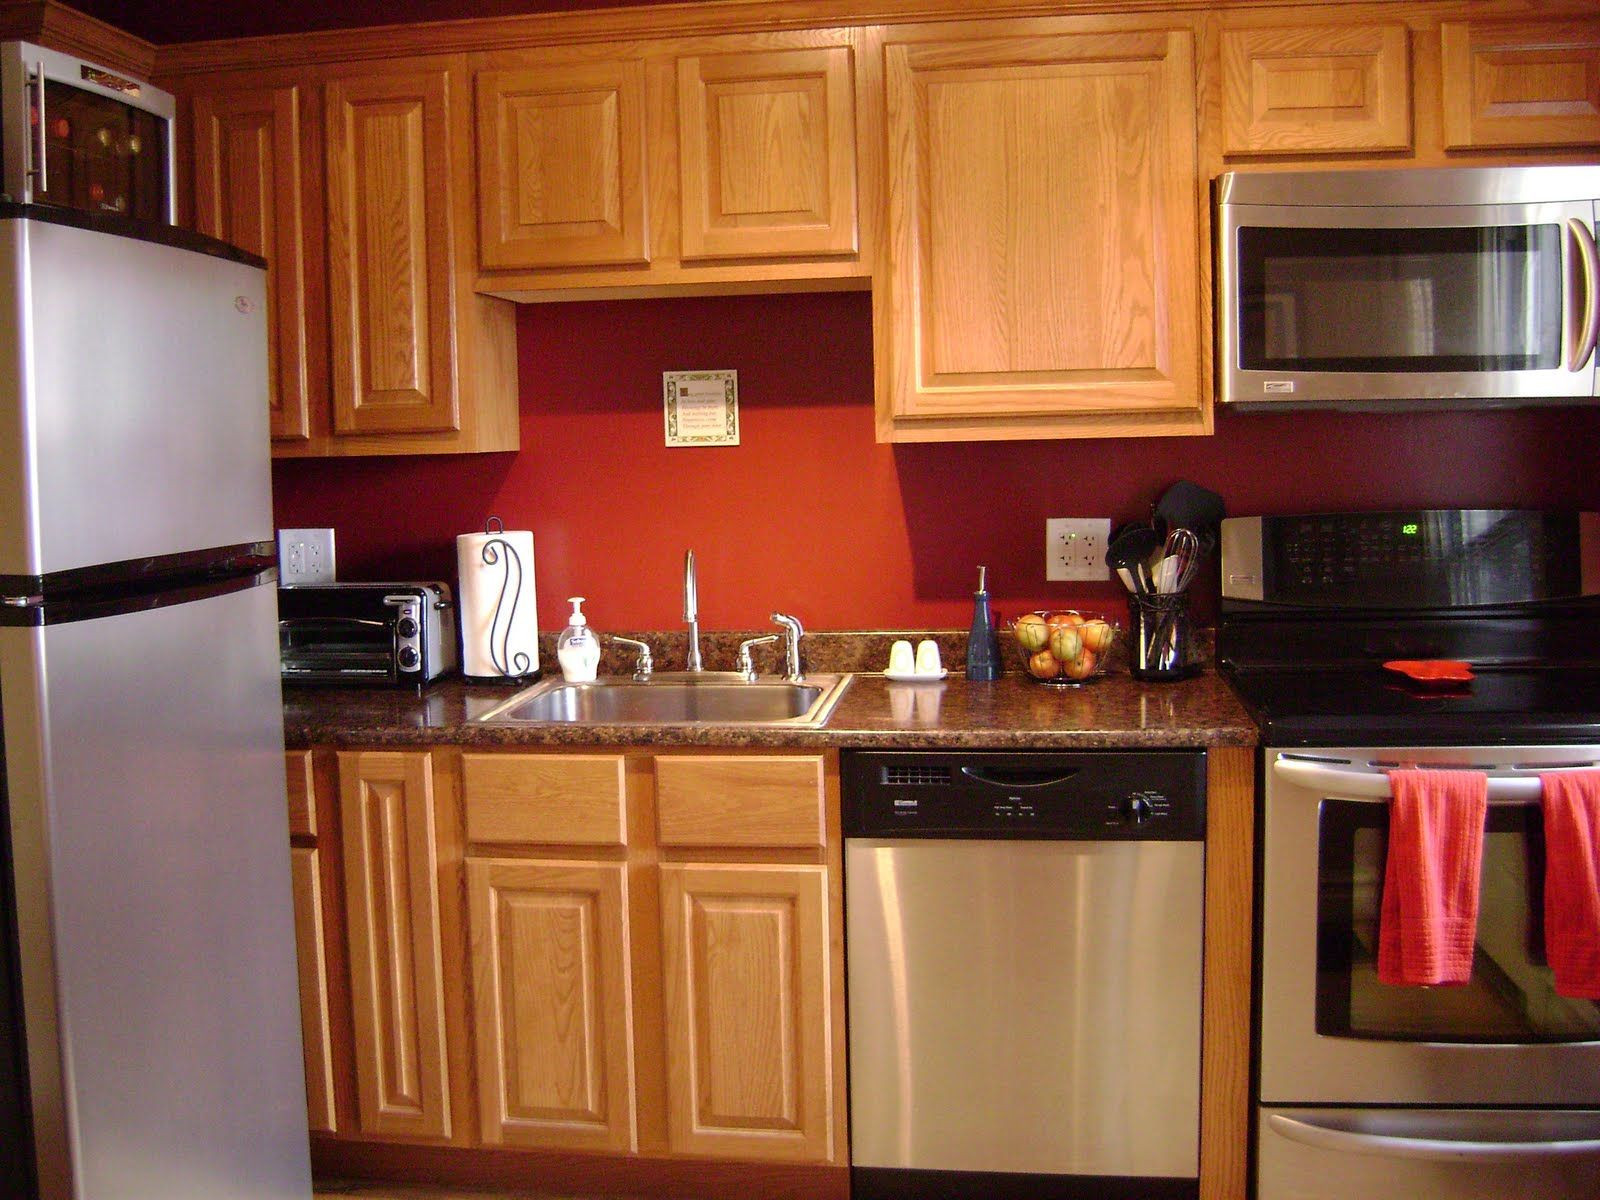 Kitchen With Red Wall
 Kitchen Wall Color Ideas with Oak Cabinets